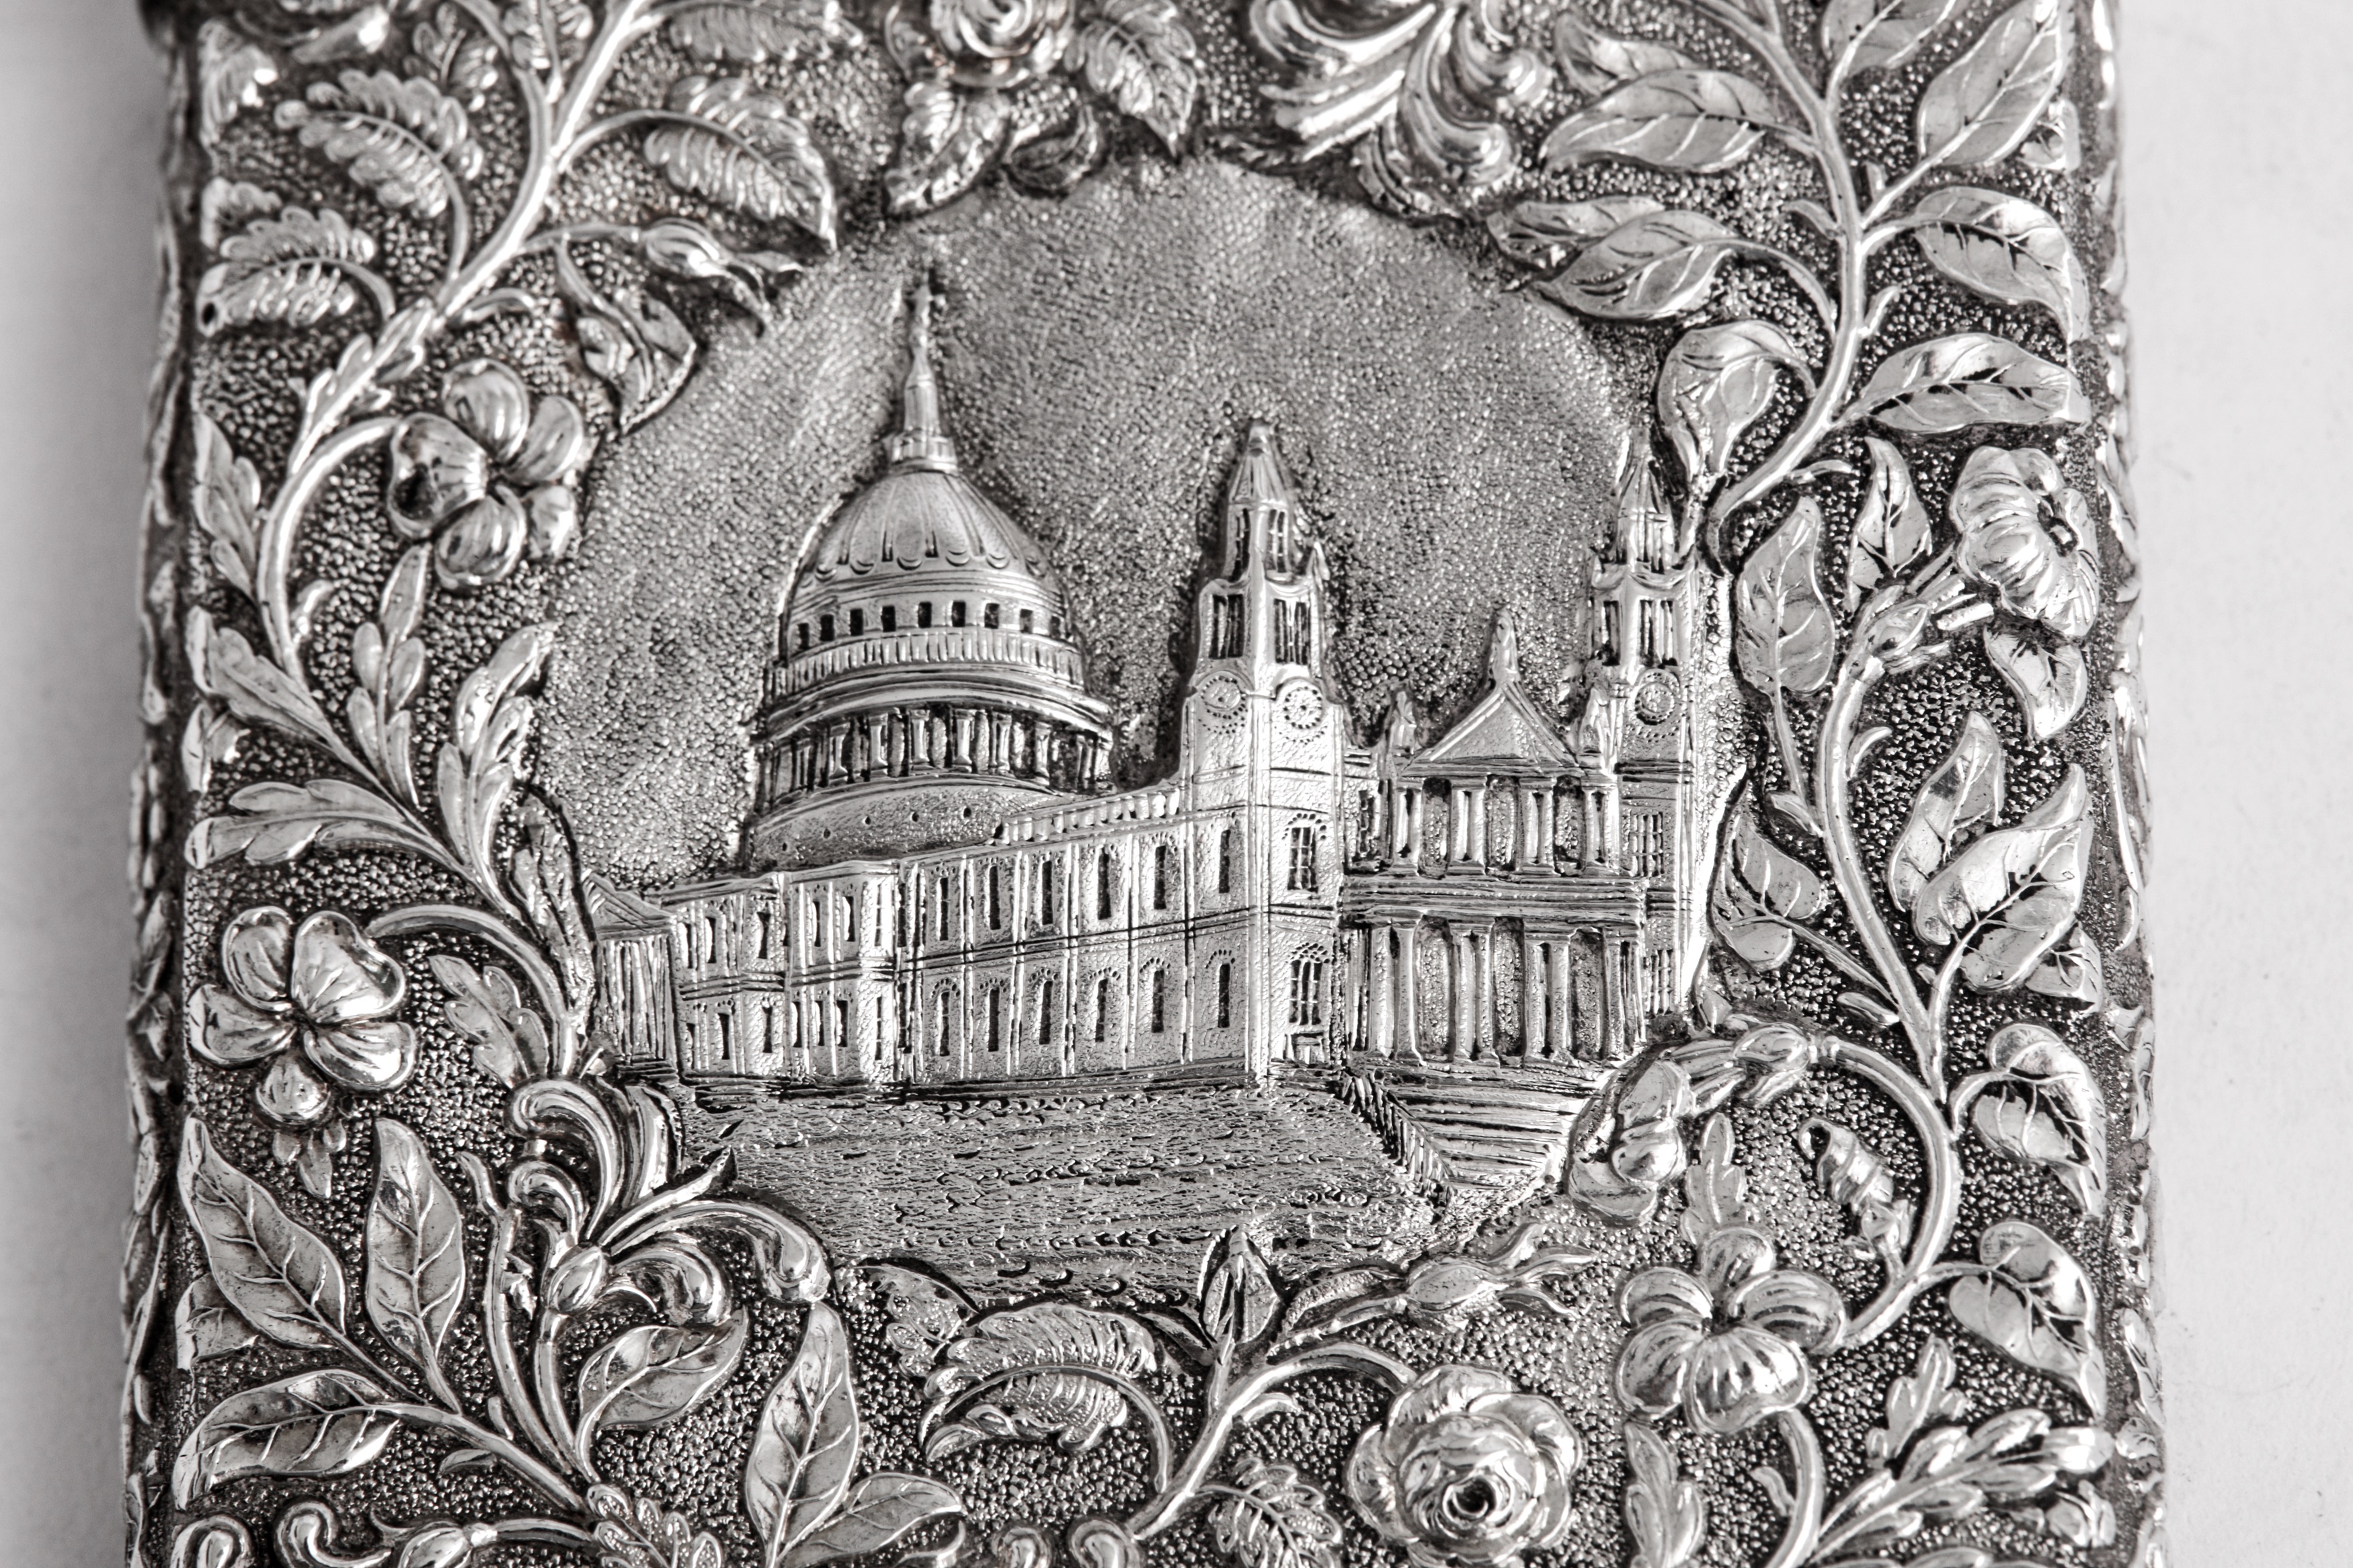 A cased Victorian sterling silver 'castle top' card case, Birmingham 1842 by Joseph Willmore - Image 4 of 6